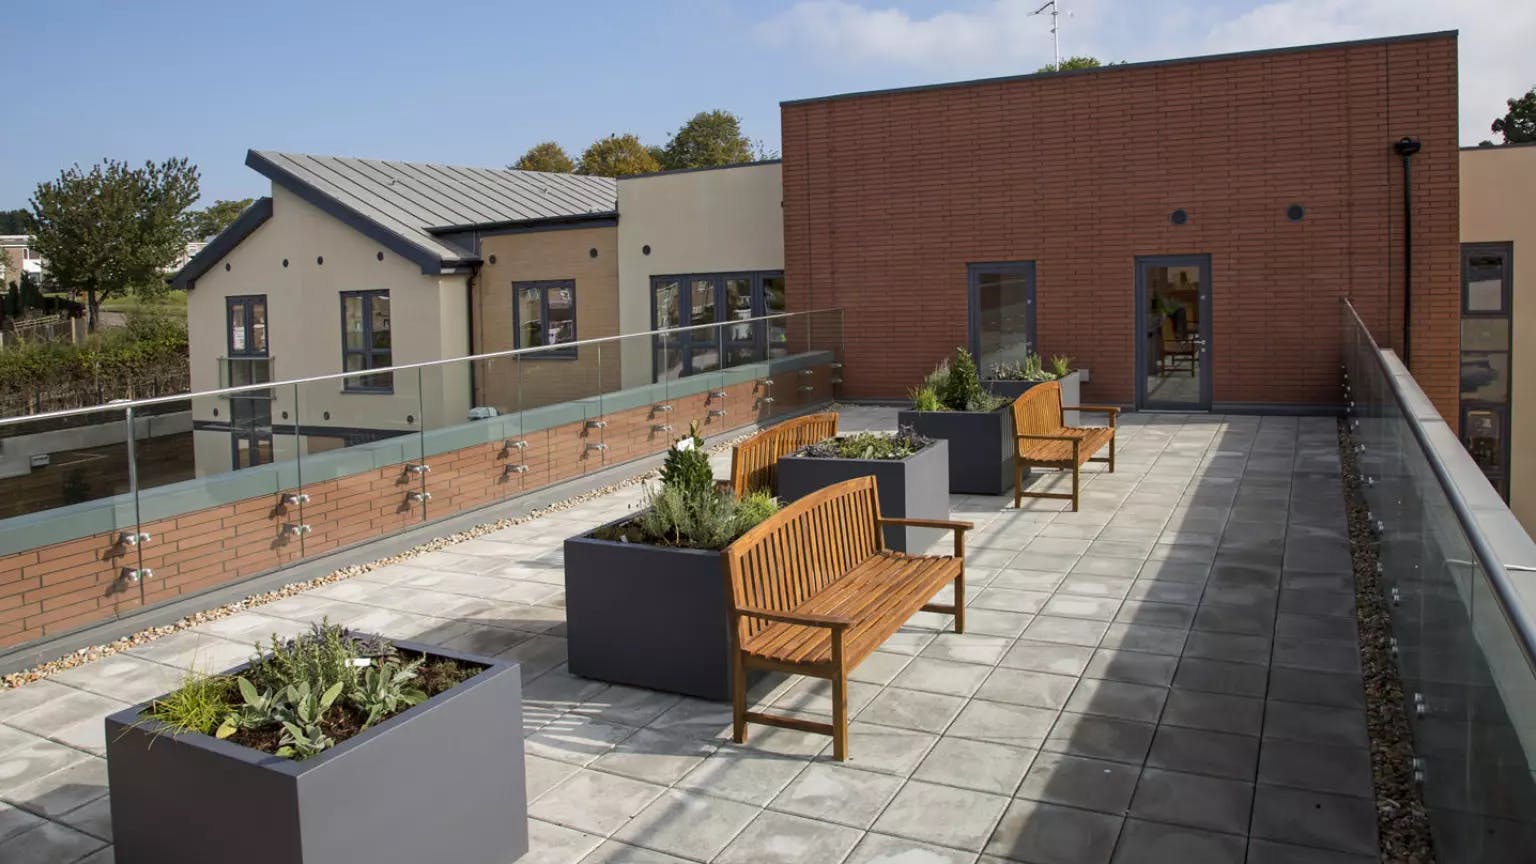 Roof Terrace of Garden City Court care home in Letchworth Garden City, Hertfordshire